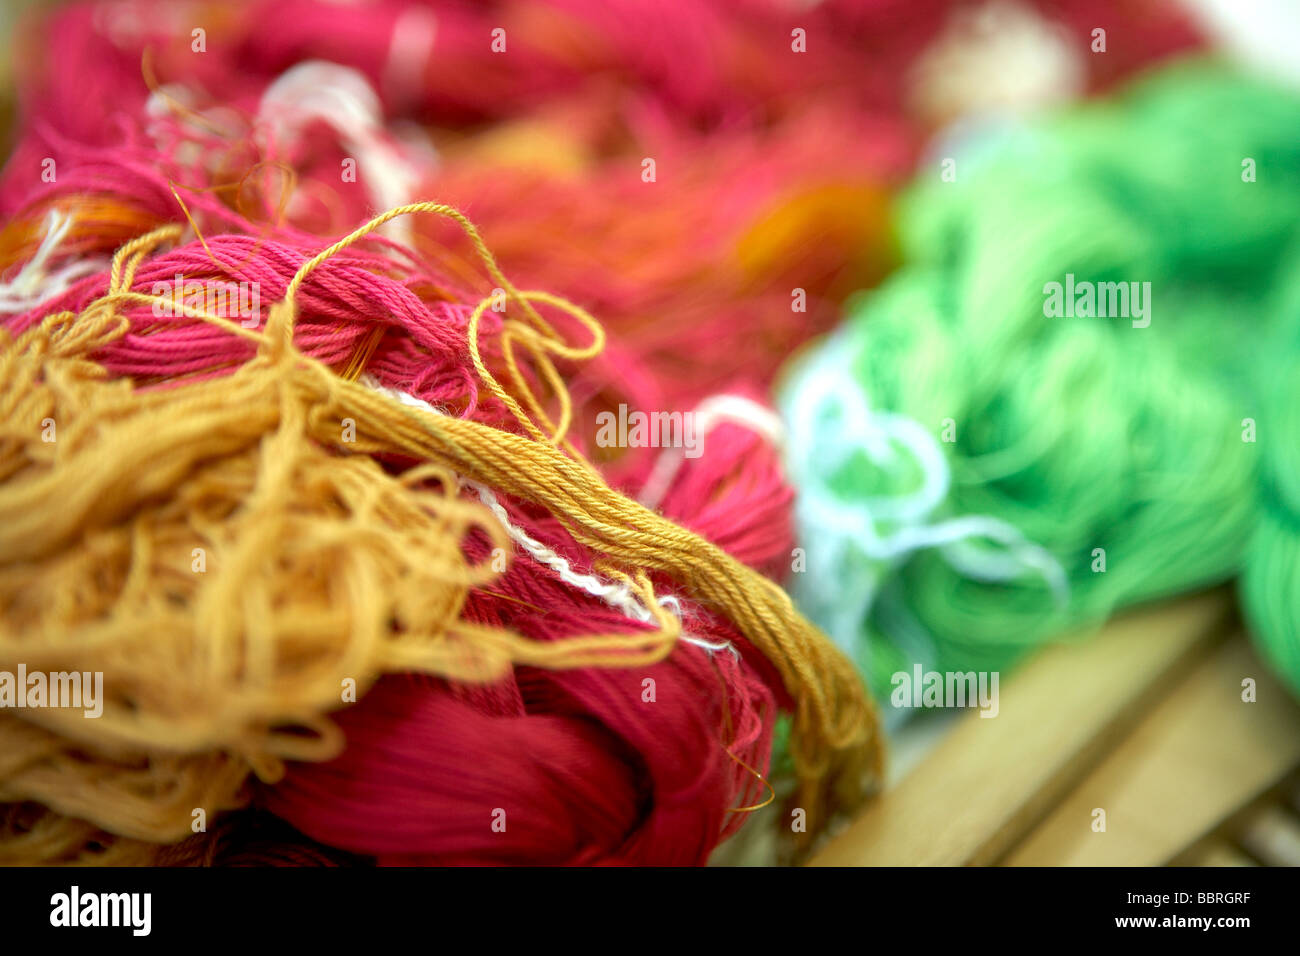 CLOSE UP OF BUNDLES OF WOOL TWINE STRING Stock Photo